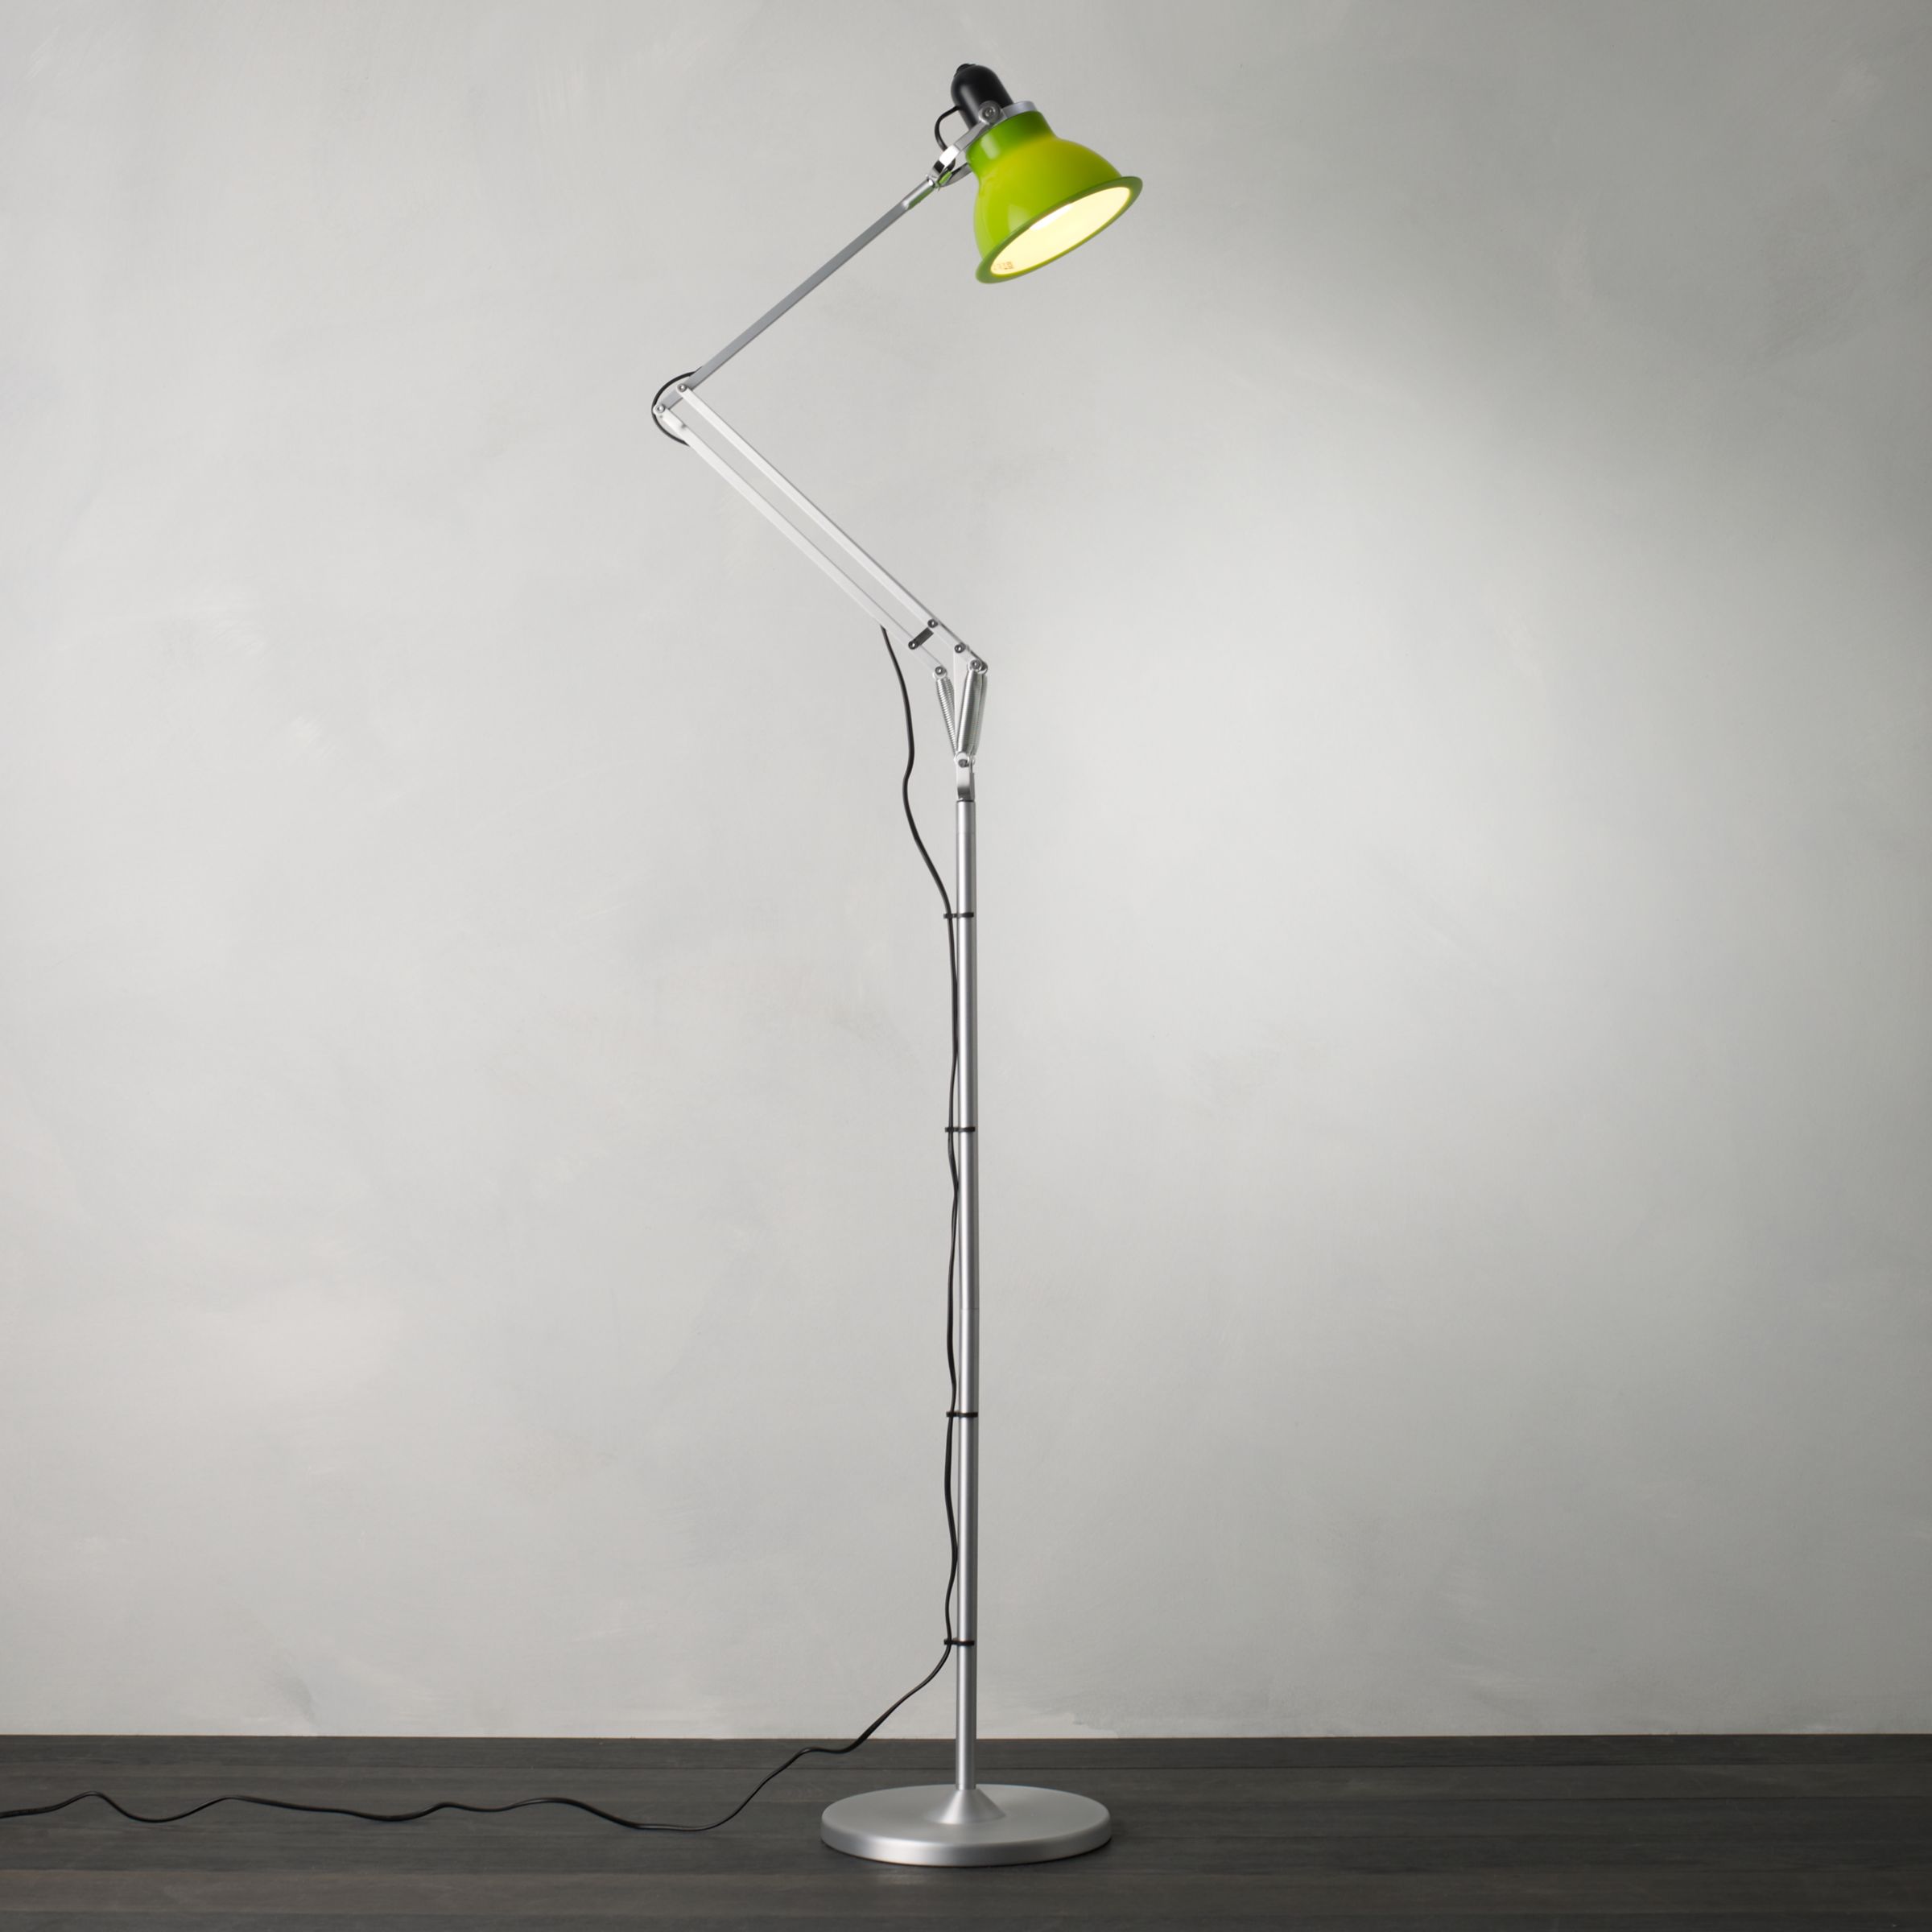 Anglepoise Type 1228 Standing Floor Lamp, Lime